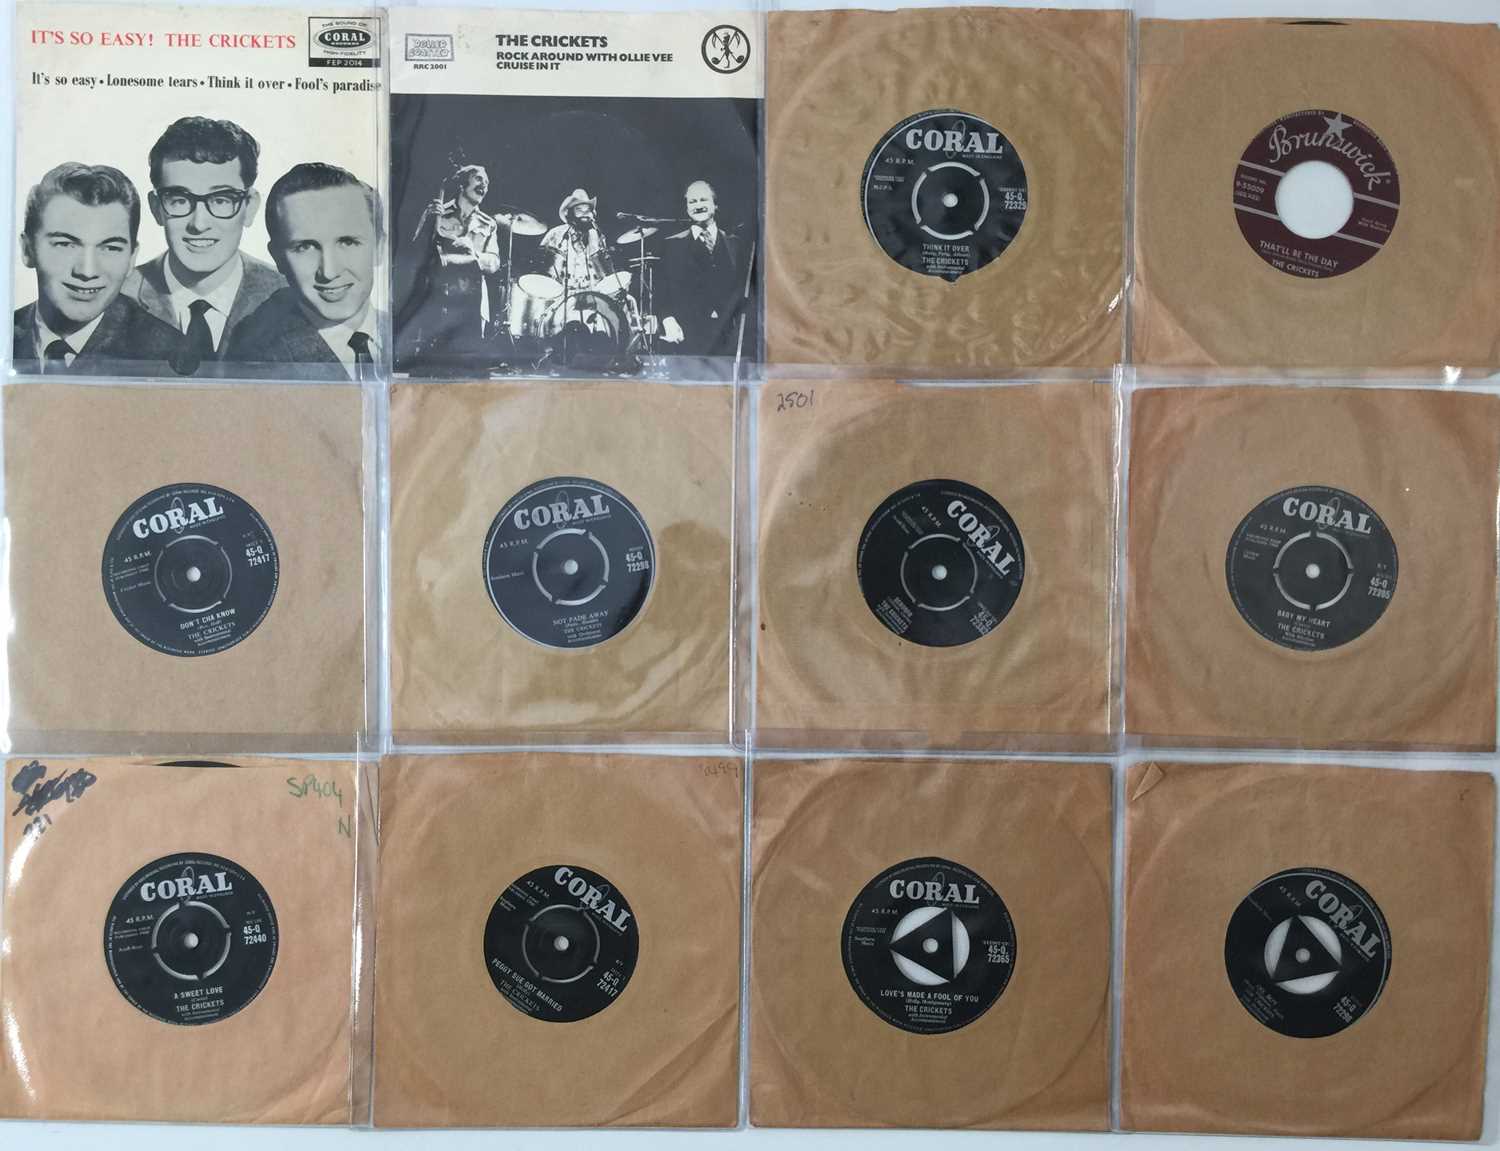 THE CRICKETS (AND RELATED) - 7"/EP COLLECTION - Image 2 of 3